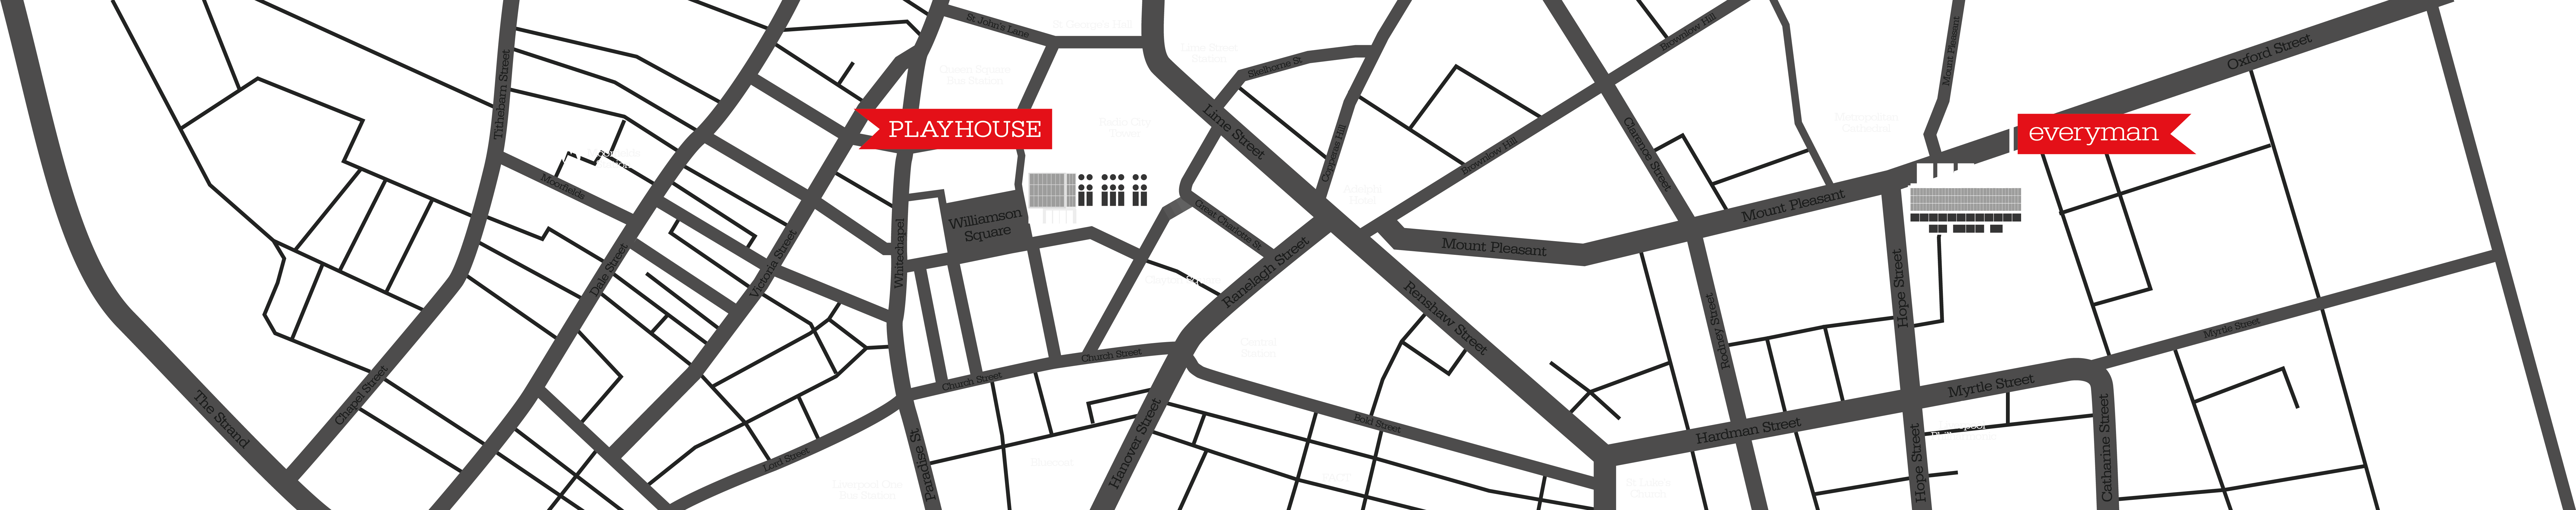 A map of Liverpool showing the Liverpool Playhouse Theatre and Liverpool Everyman Theatre